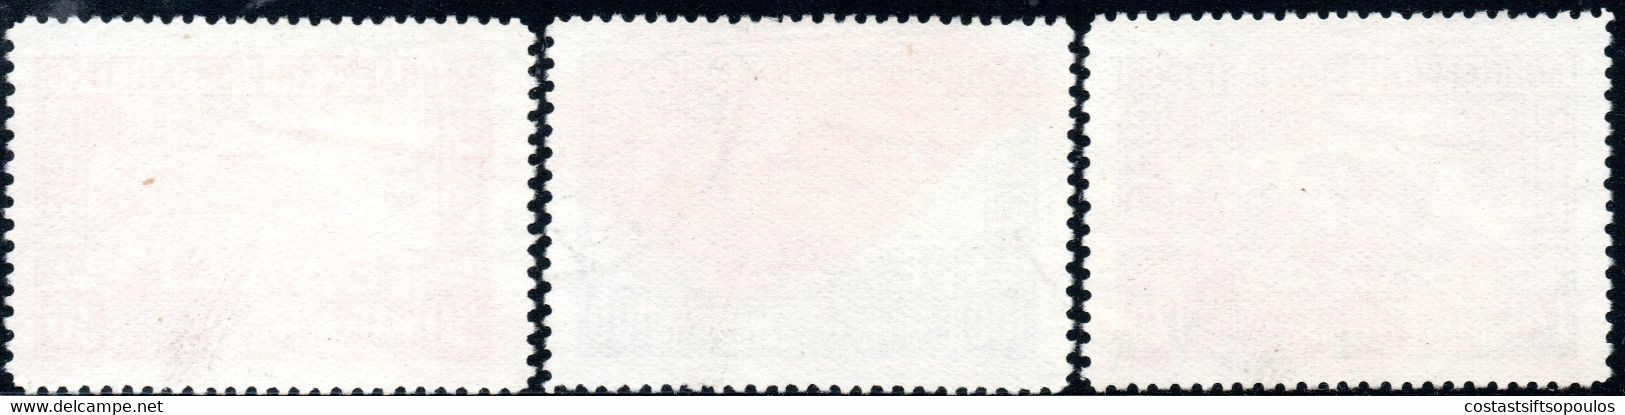 762.GREECE.1933 ZEPPELIN # 5-7 - Used Stamps